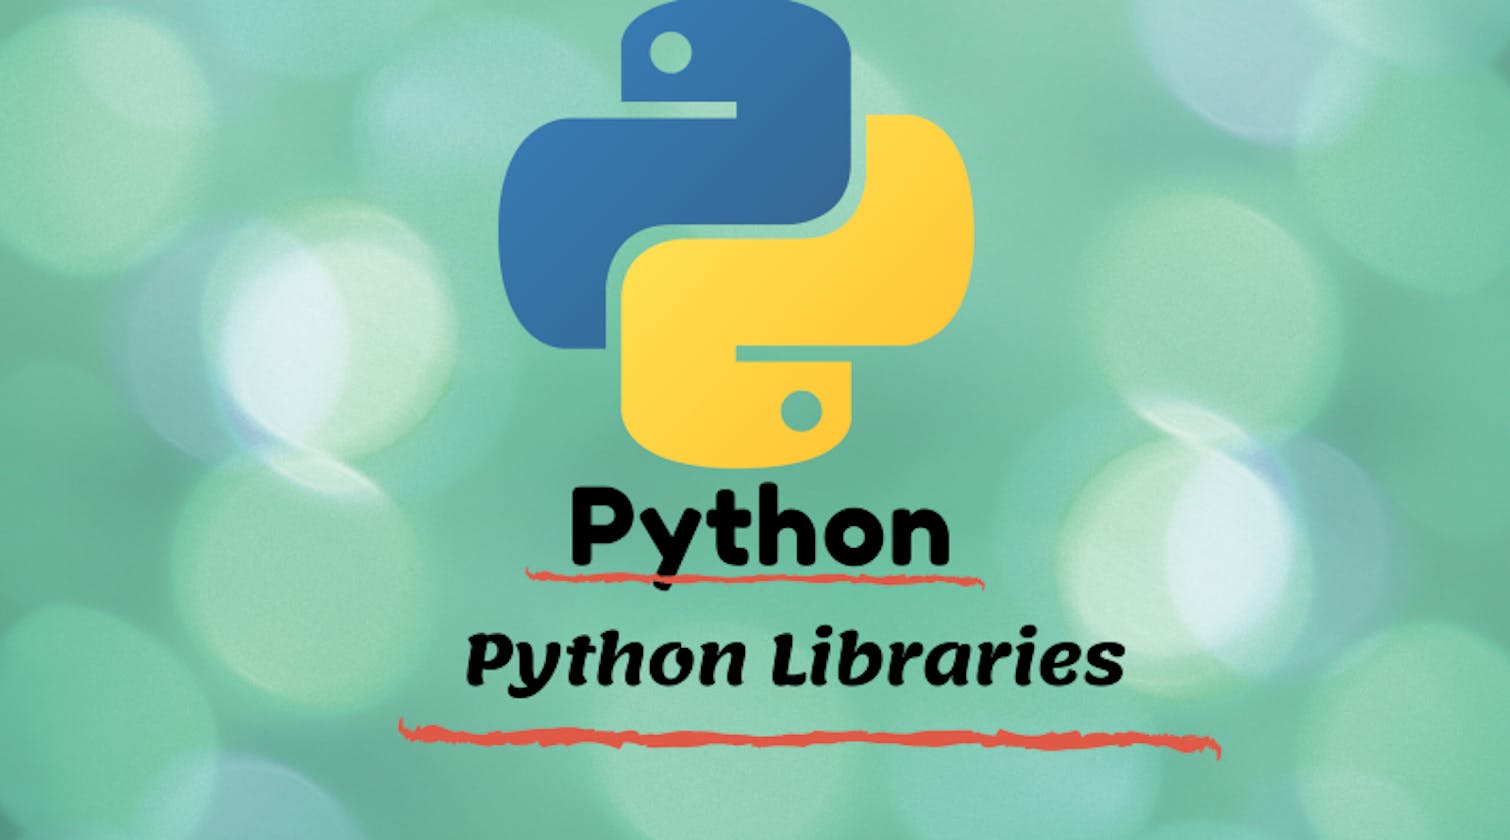 7 Unique and Underrated Python Libraries